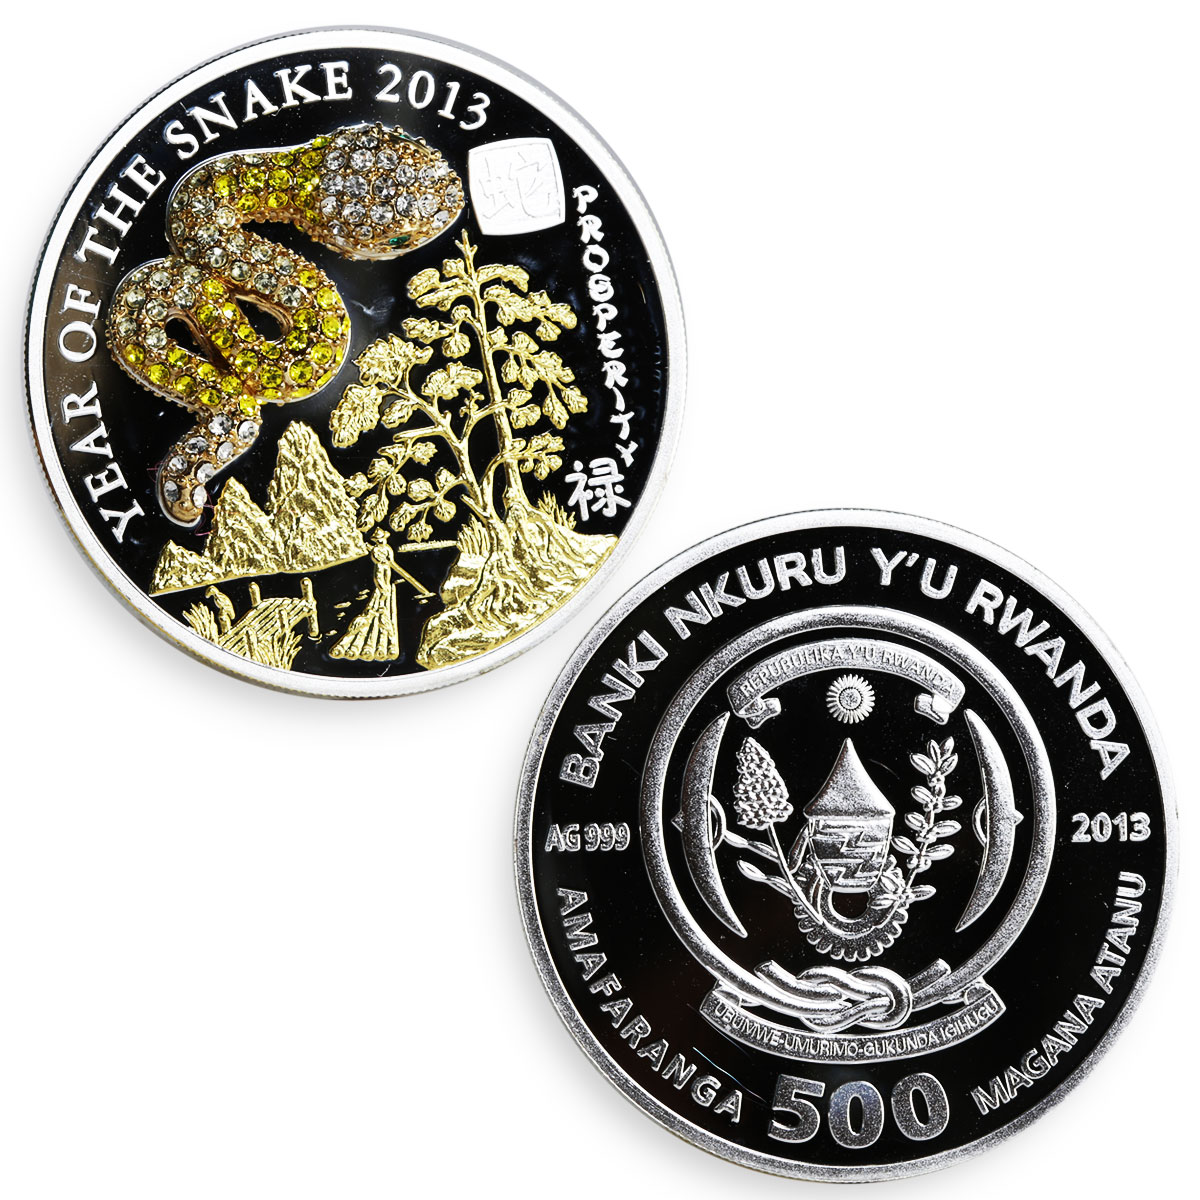 Rwanda set of 3 coins Year of the Snake gemstones gilded proof silver coin 2013